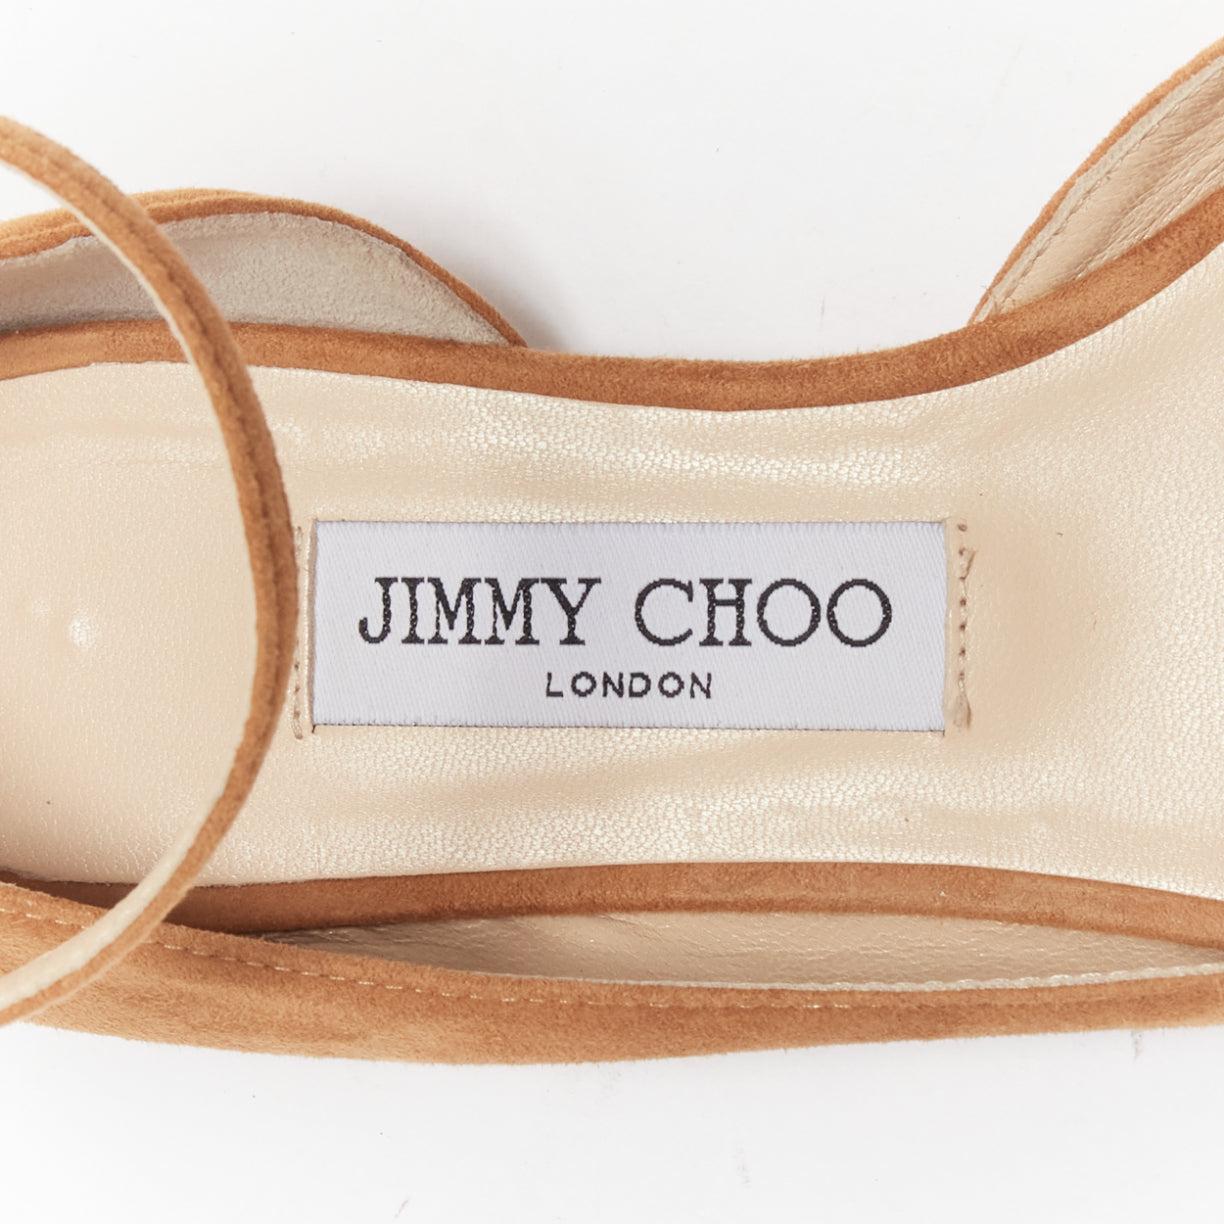 JIMMY CHOO Lucy tan brown suede ankle strap point toe half dorsay flats EU37.5 5